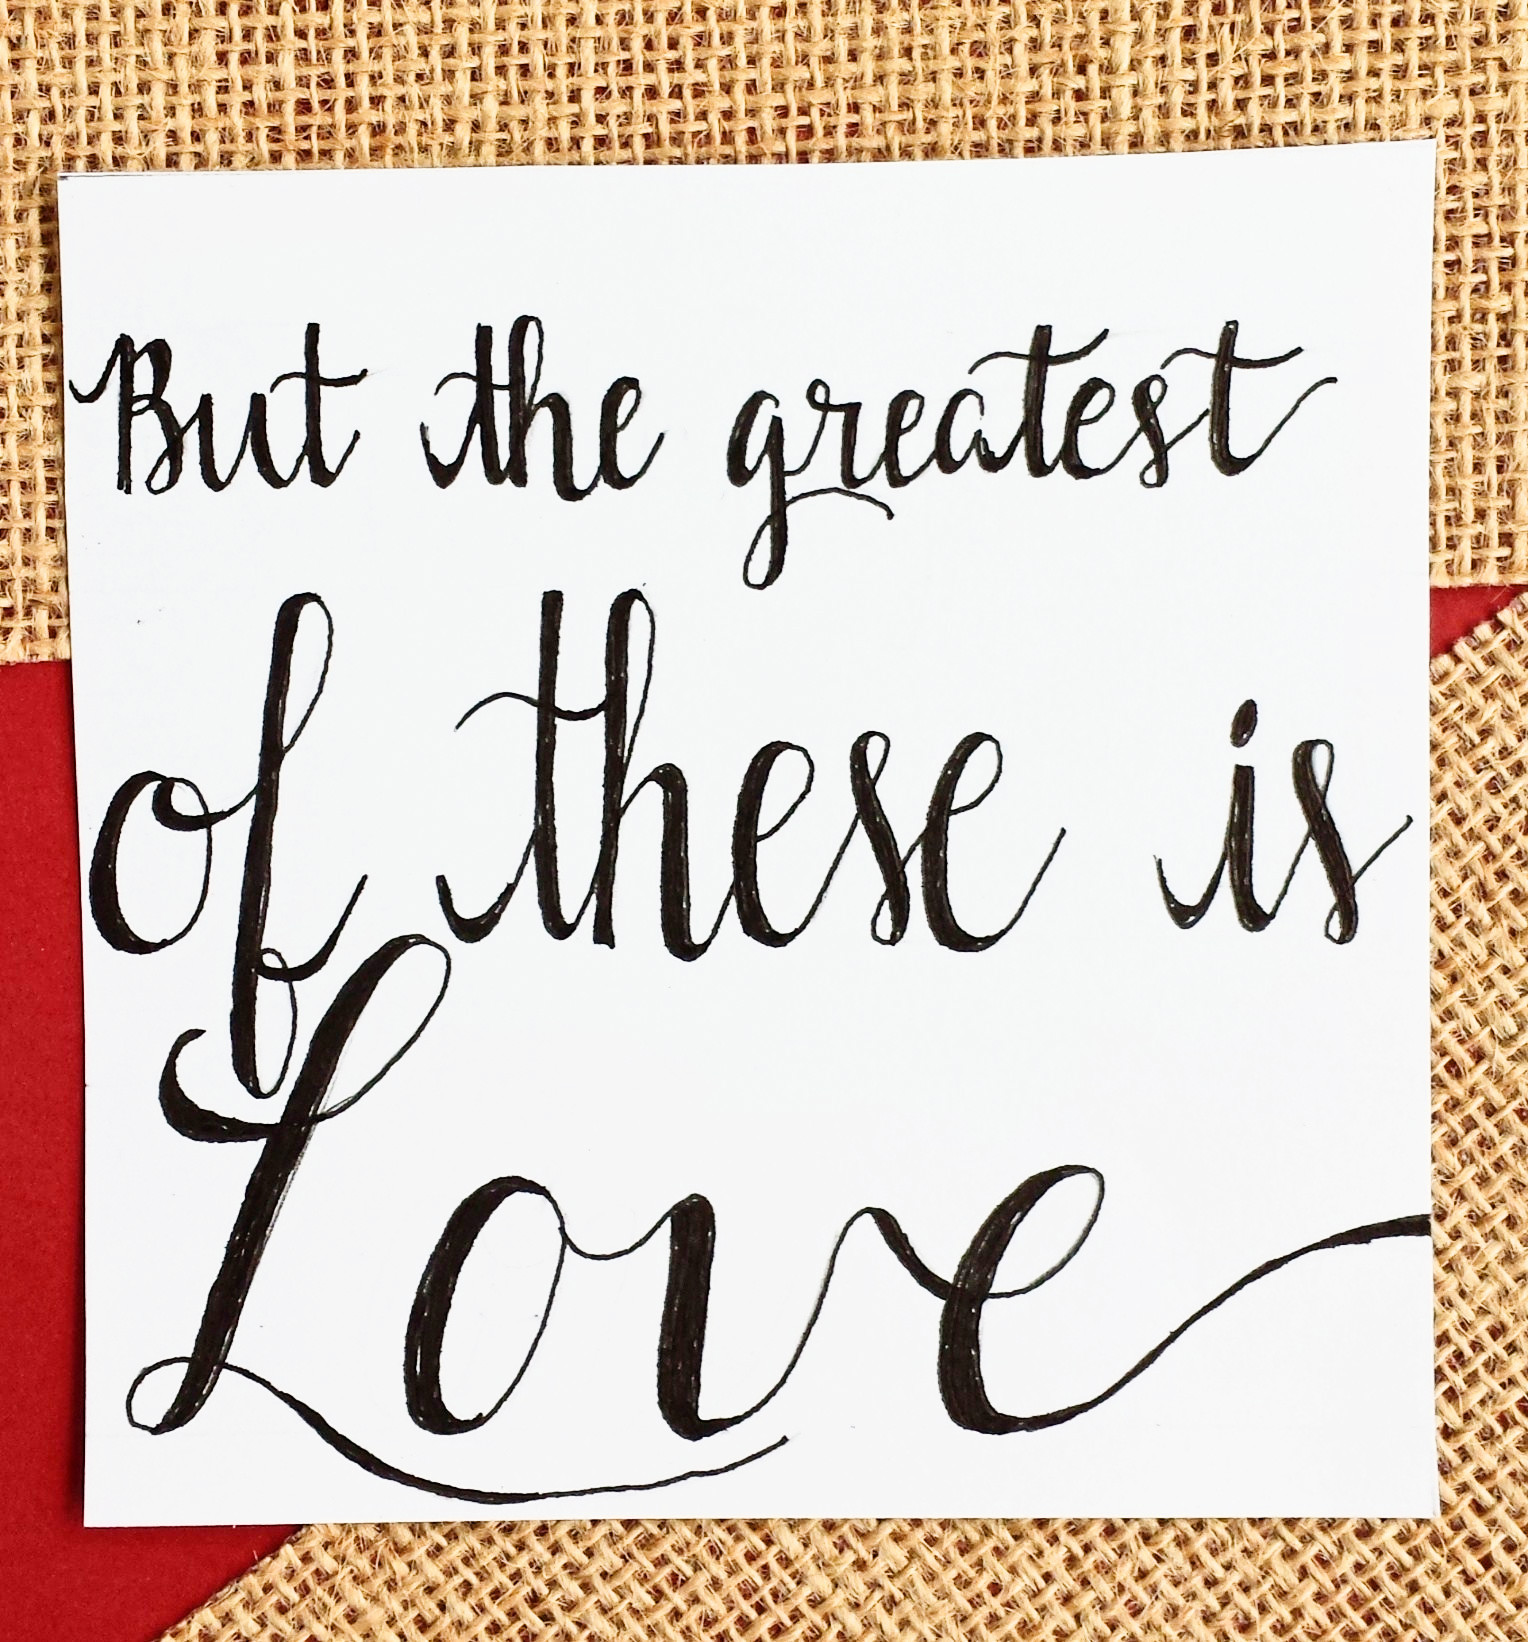 But the greatest of these is love.